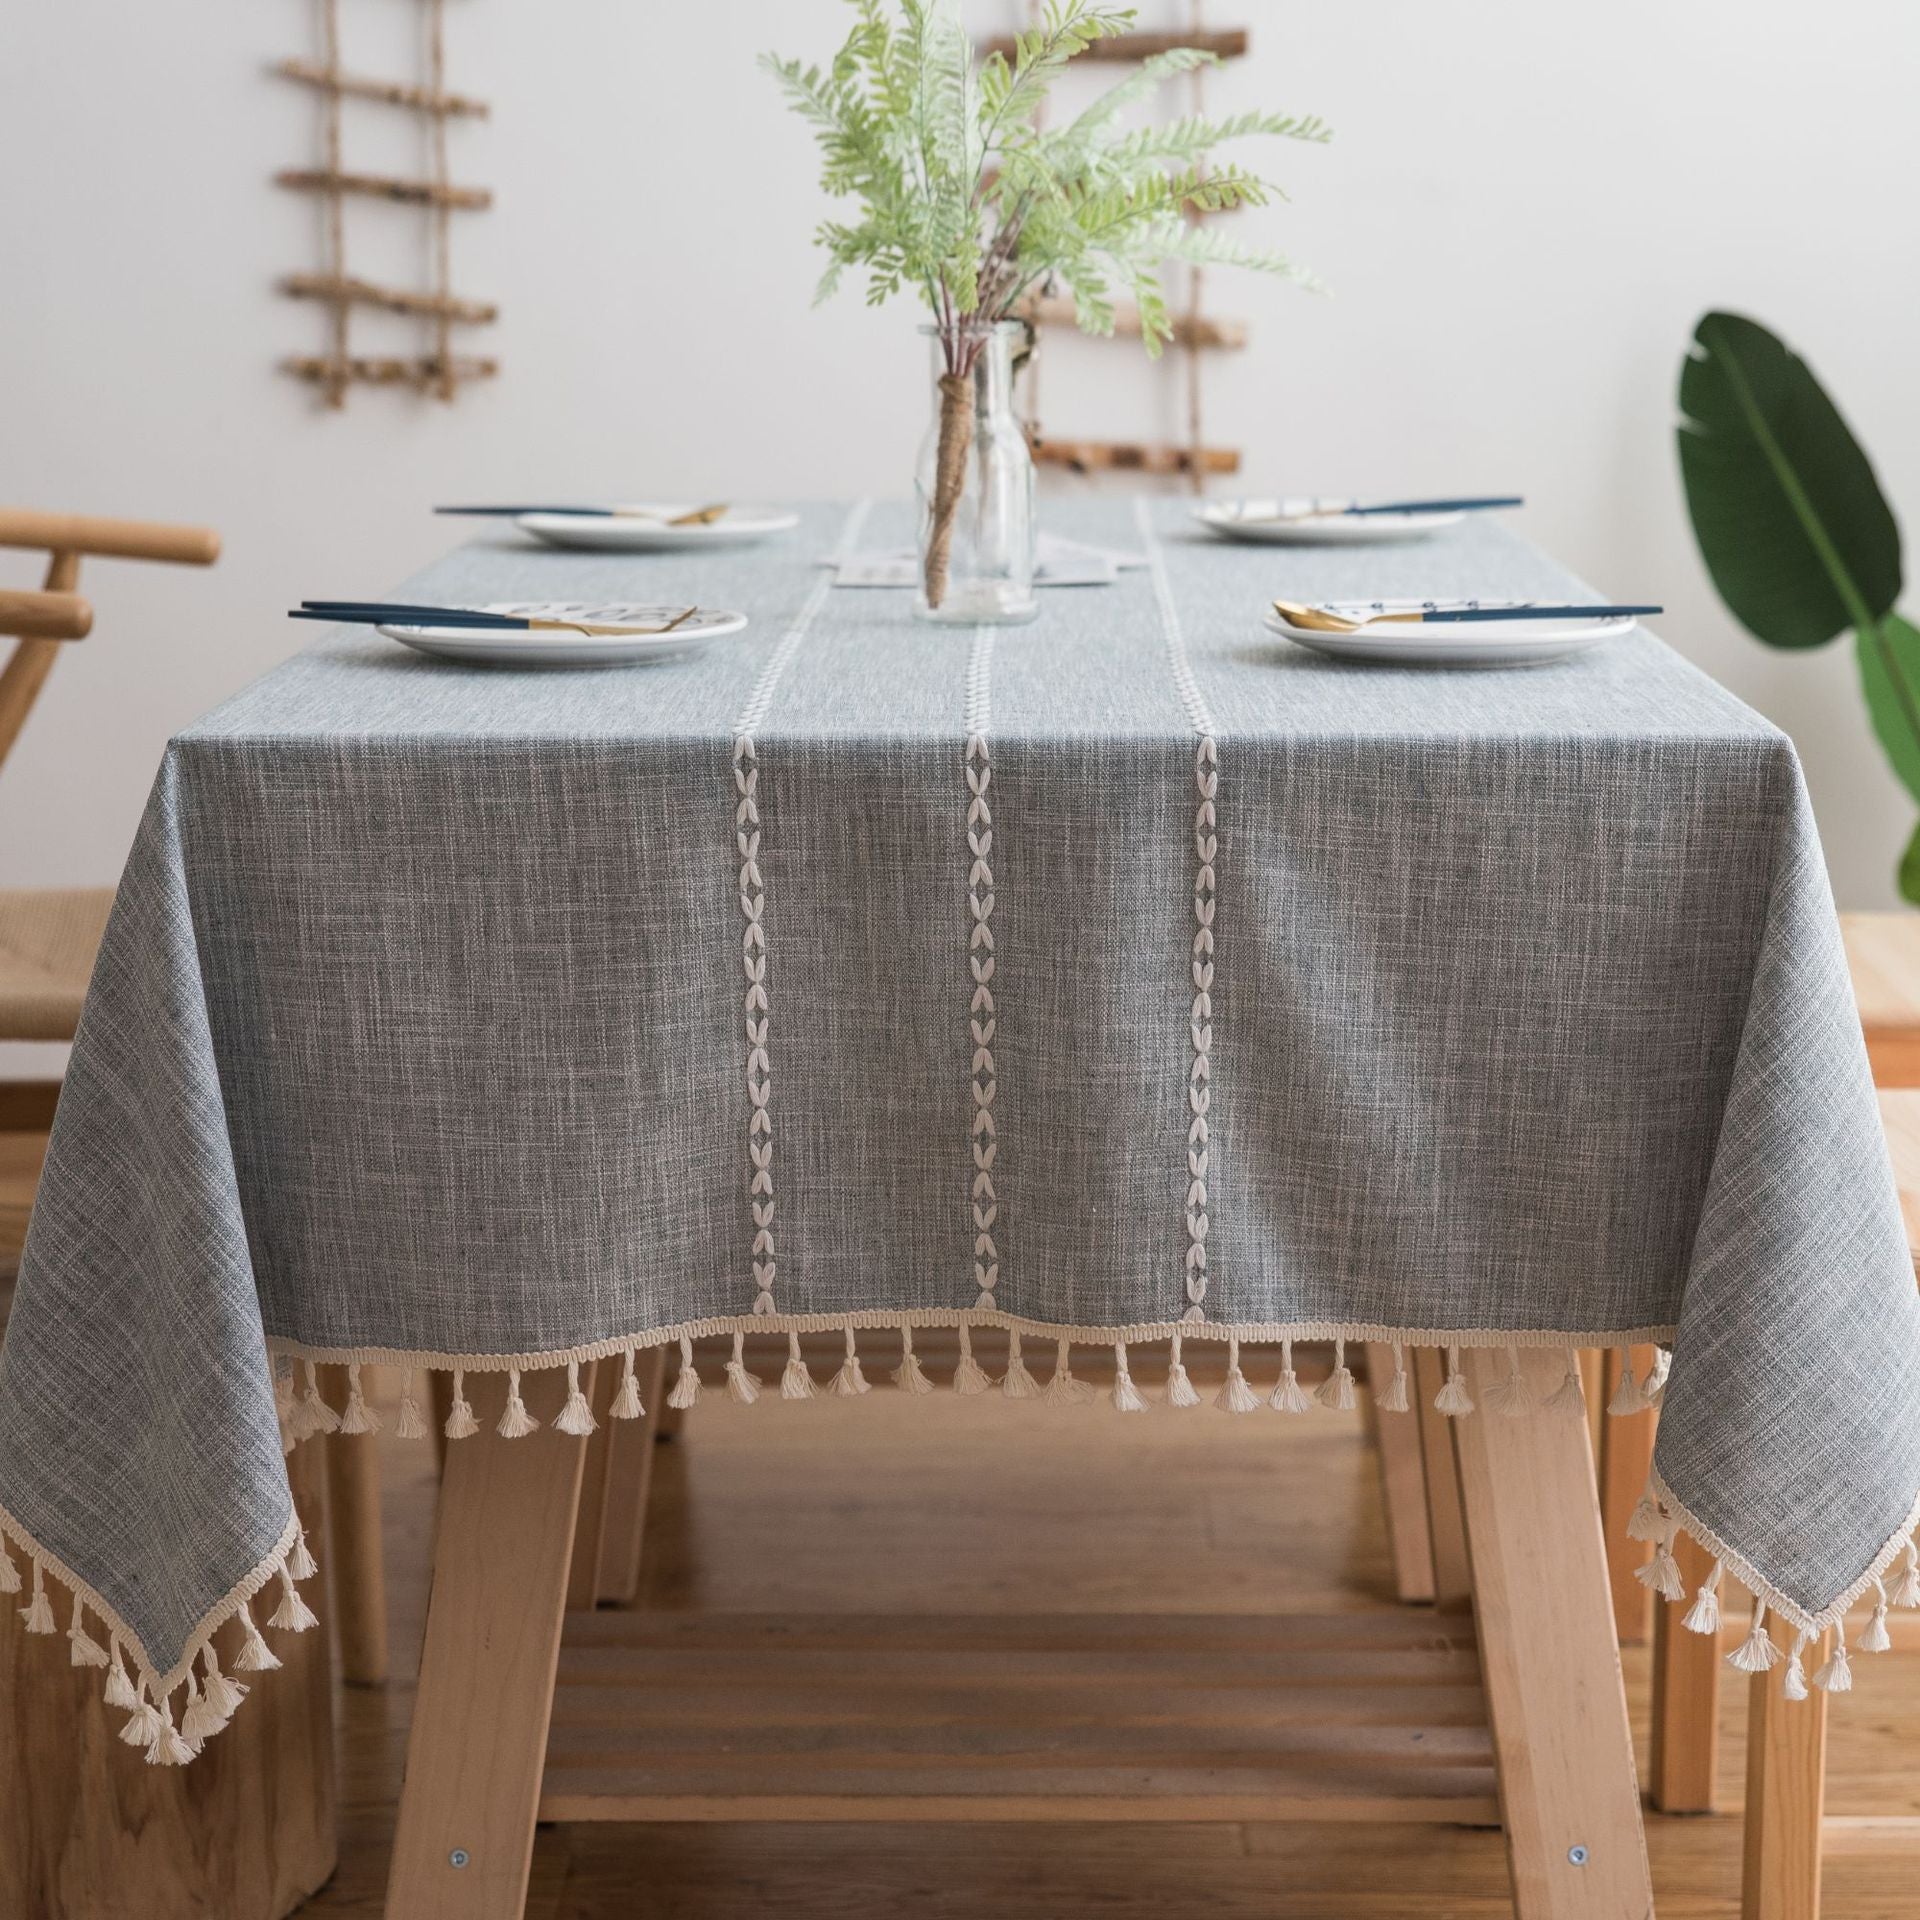 Striped Fabric Dining Room Cotton Linen Embroidered Tassel Tablecloth